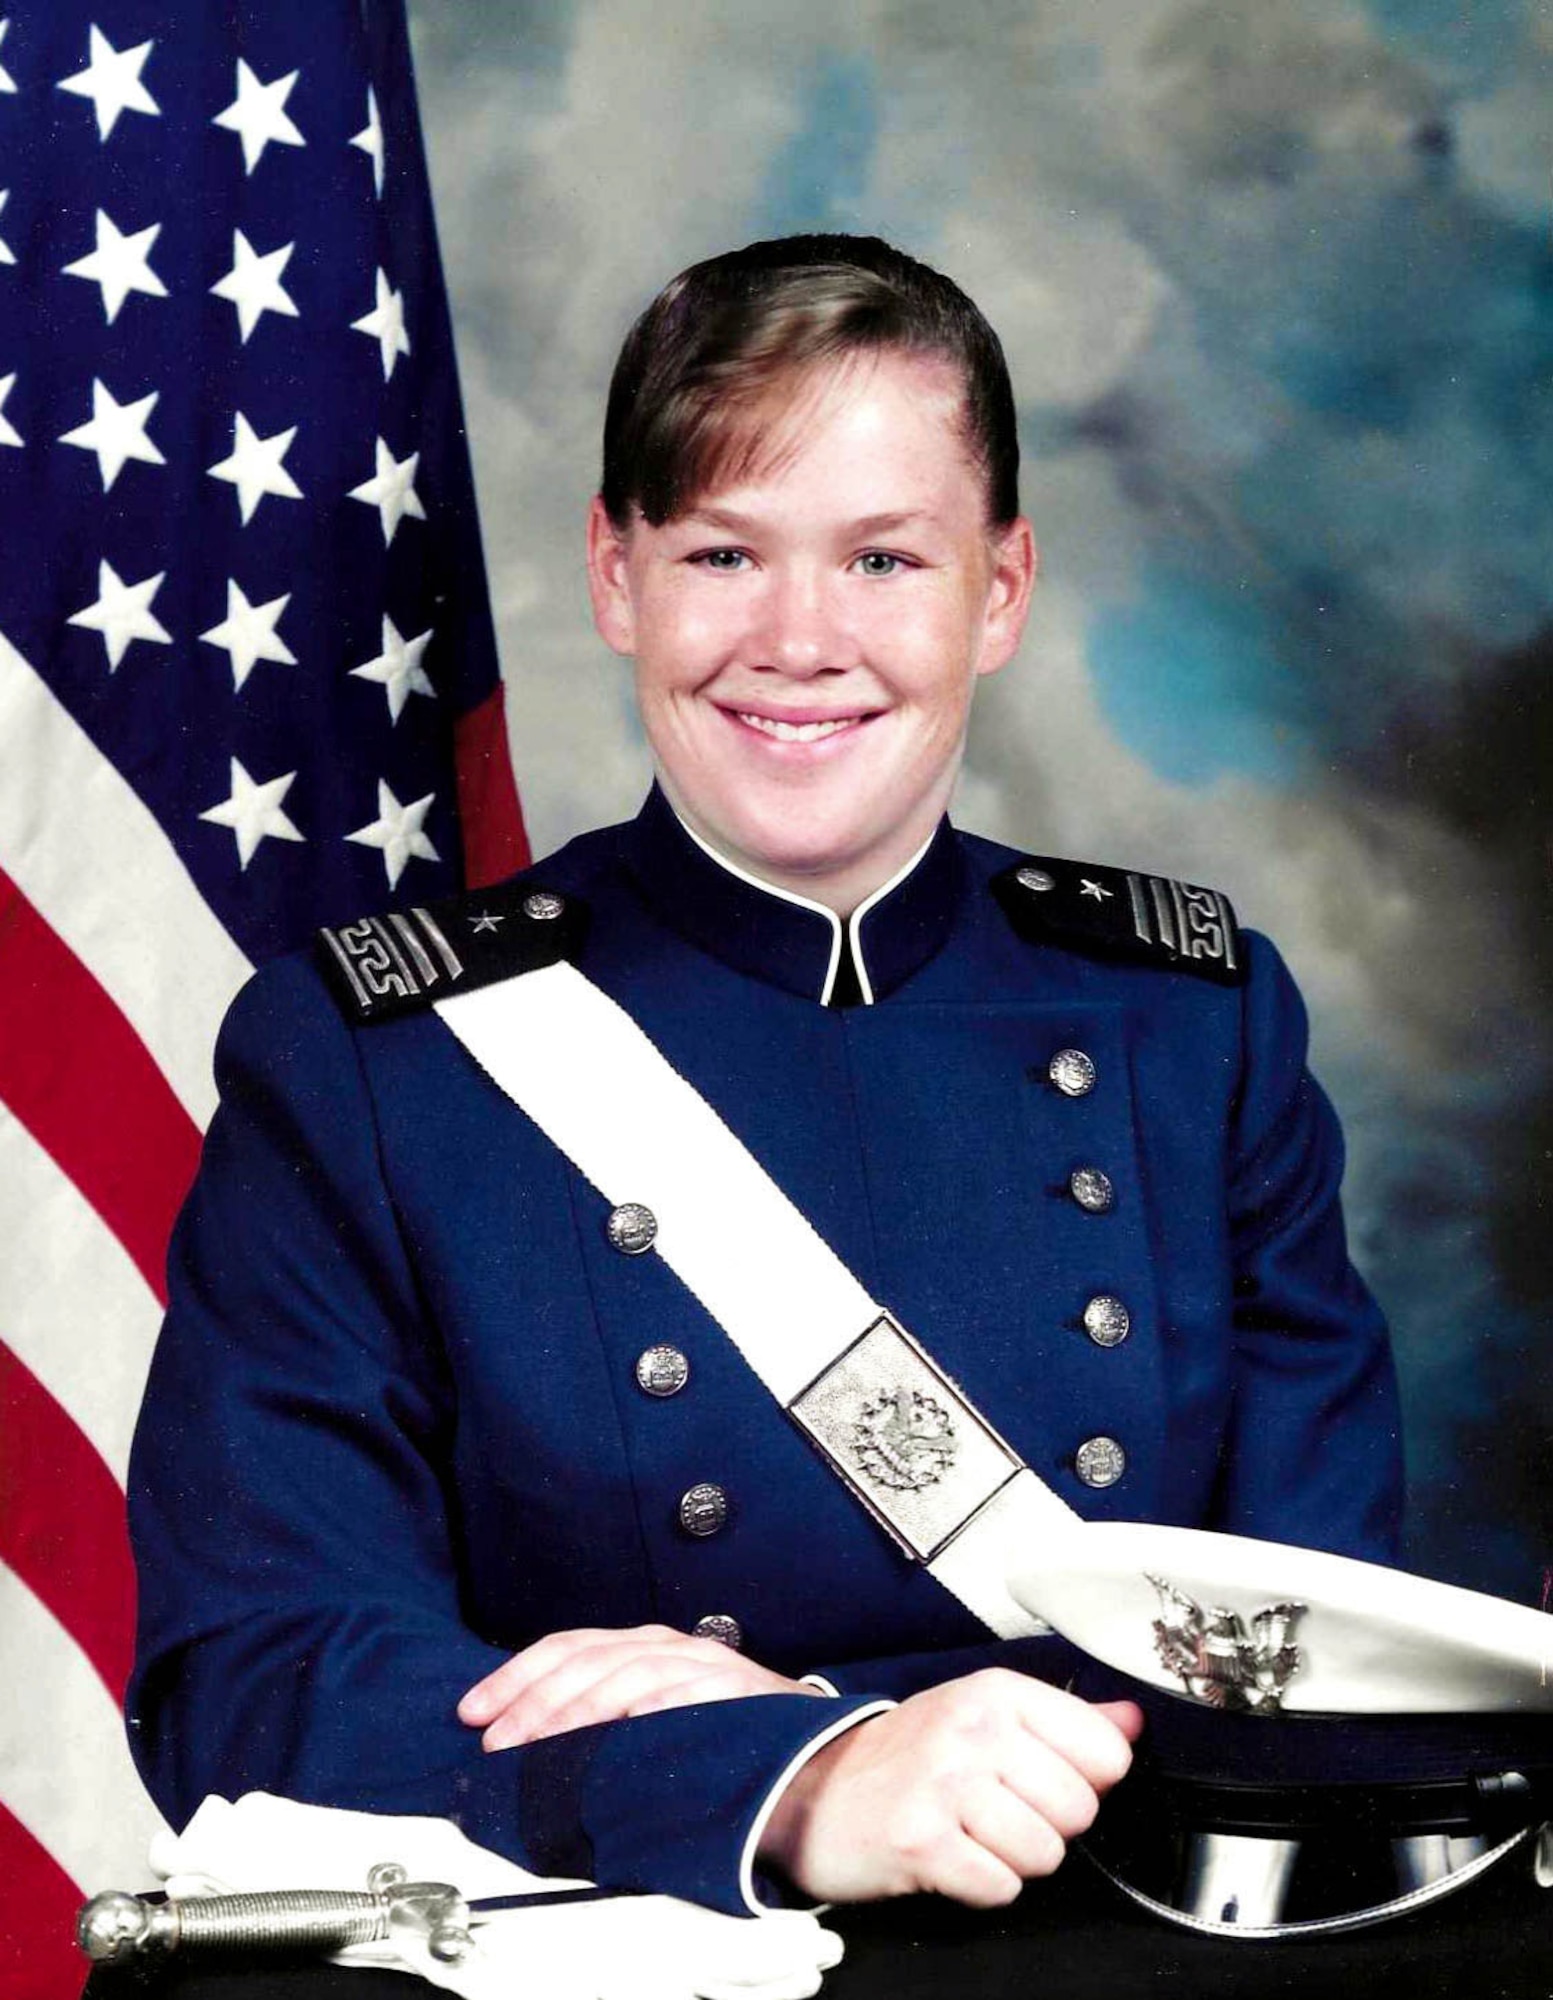 Megan Rubio, spouse of Col. Stuart Rubio, 403rd Wing commander, graduated from the Air Force Academy in 1997. In June 2021, their son Ashton departs to start his first year at the Academy and is scheduled to graduate in the class of 2025. (U.S. Air Force courtesy photo)